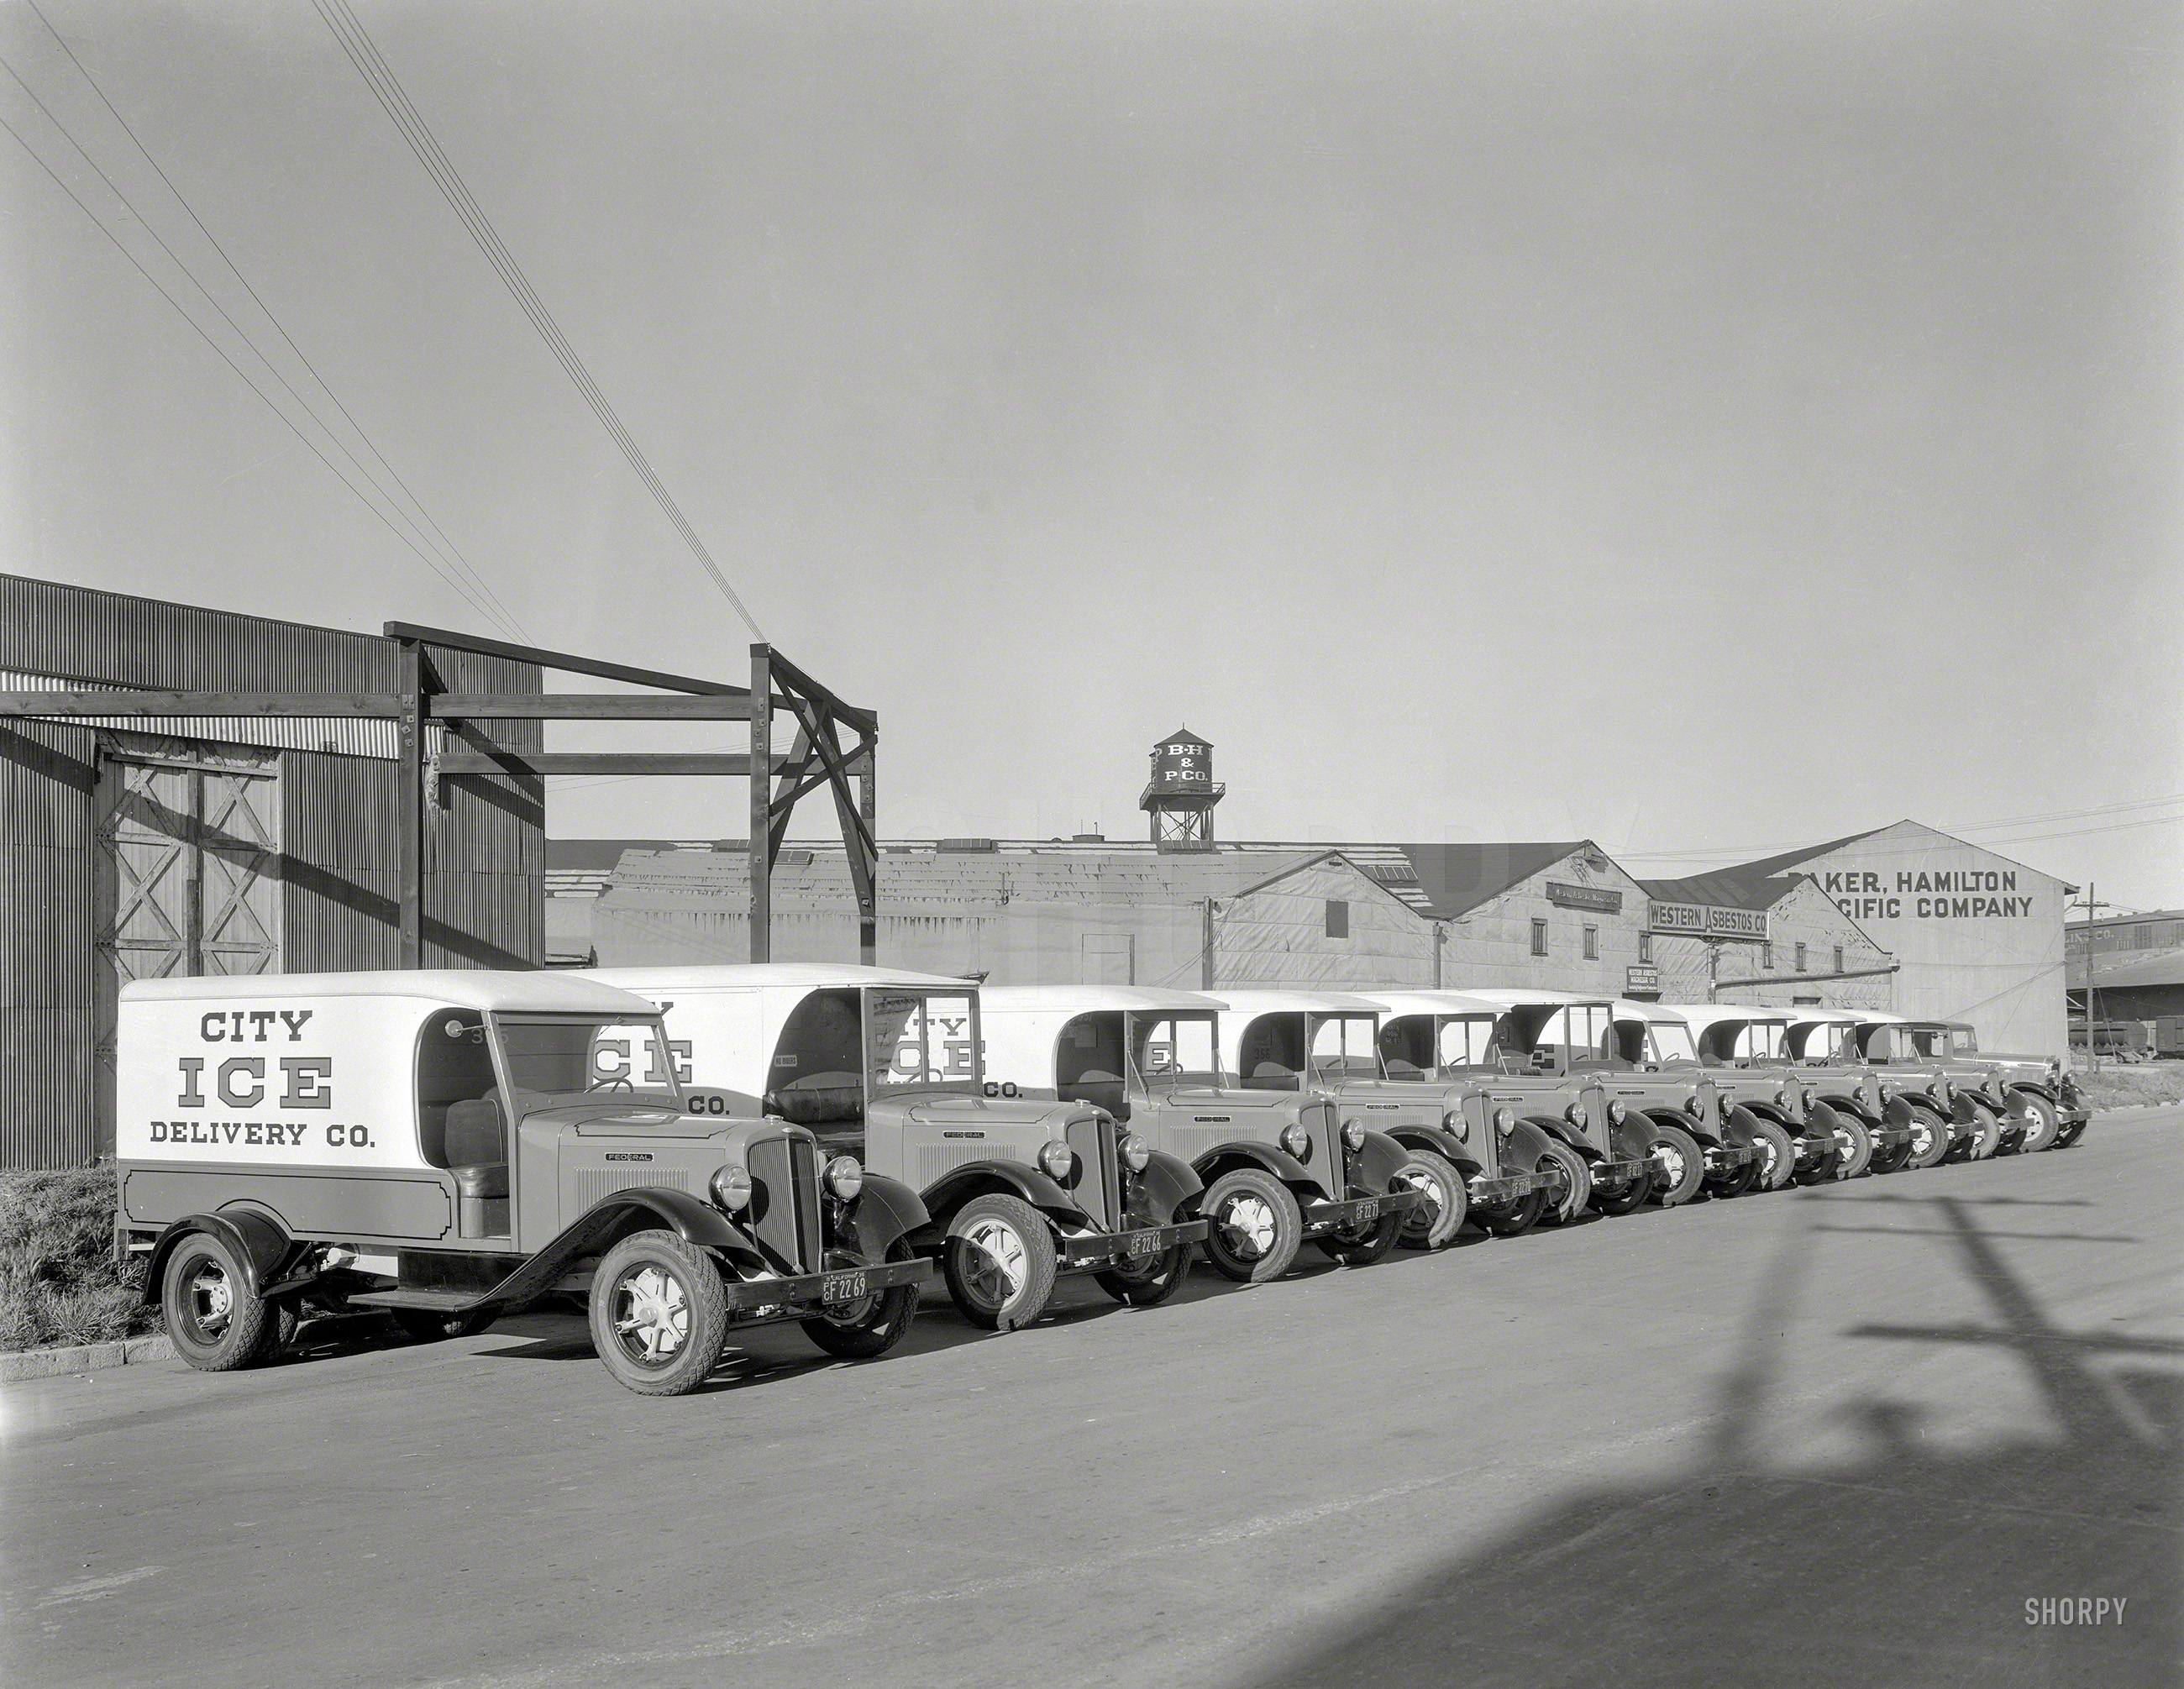 October 17, 1935. San Francisco. "Federal trucks -- City Ice Delivery Co." Neighbors of the "Western Asbestos Magnesia Co." 8x10 Eastman Kodak nitrate negative, originally from the Wyland Stanley collection. View full size.